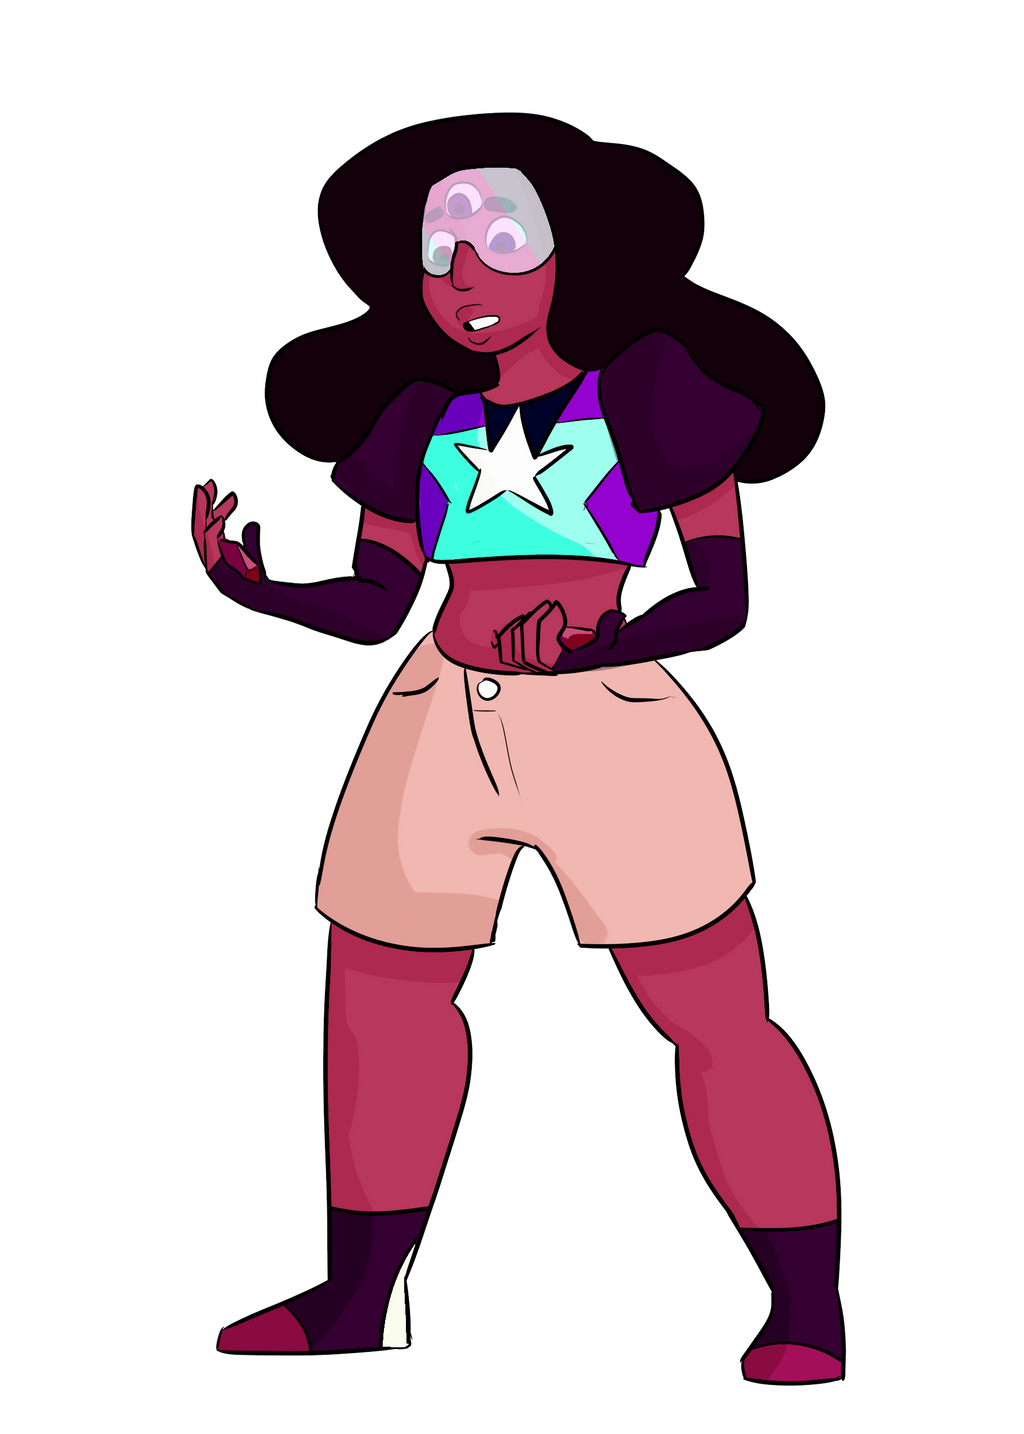 Garnet/Connie Fusion by Toodlenoodle on DeviantArt